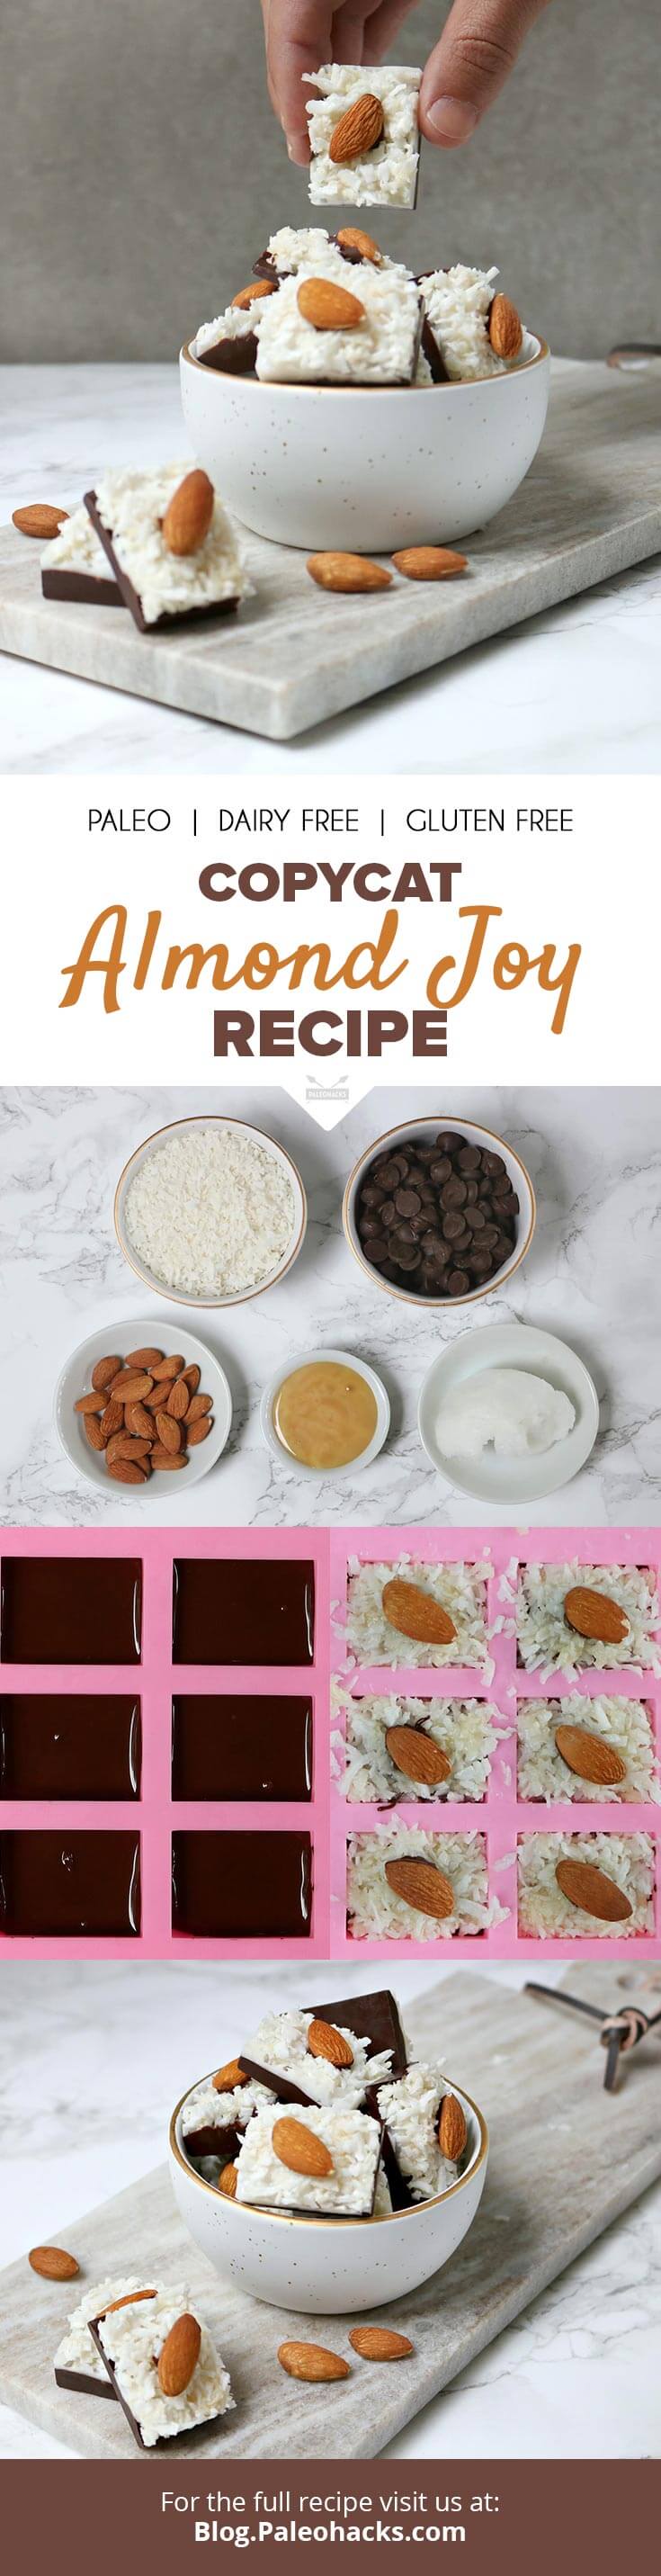 Mineral-rich raw honey, coconut, dark chocolate and almonds form a copycat Almond Joy candy bar with health benefits to boot.